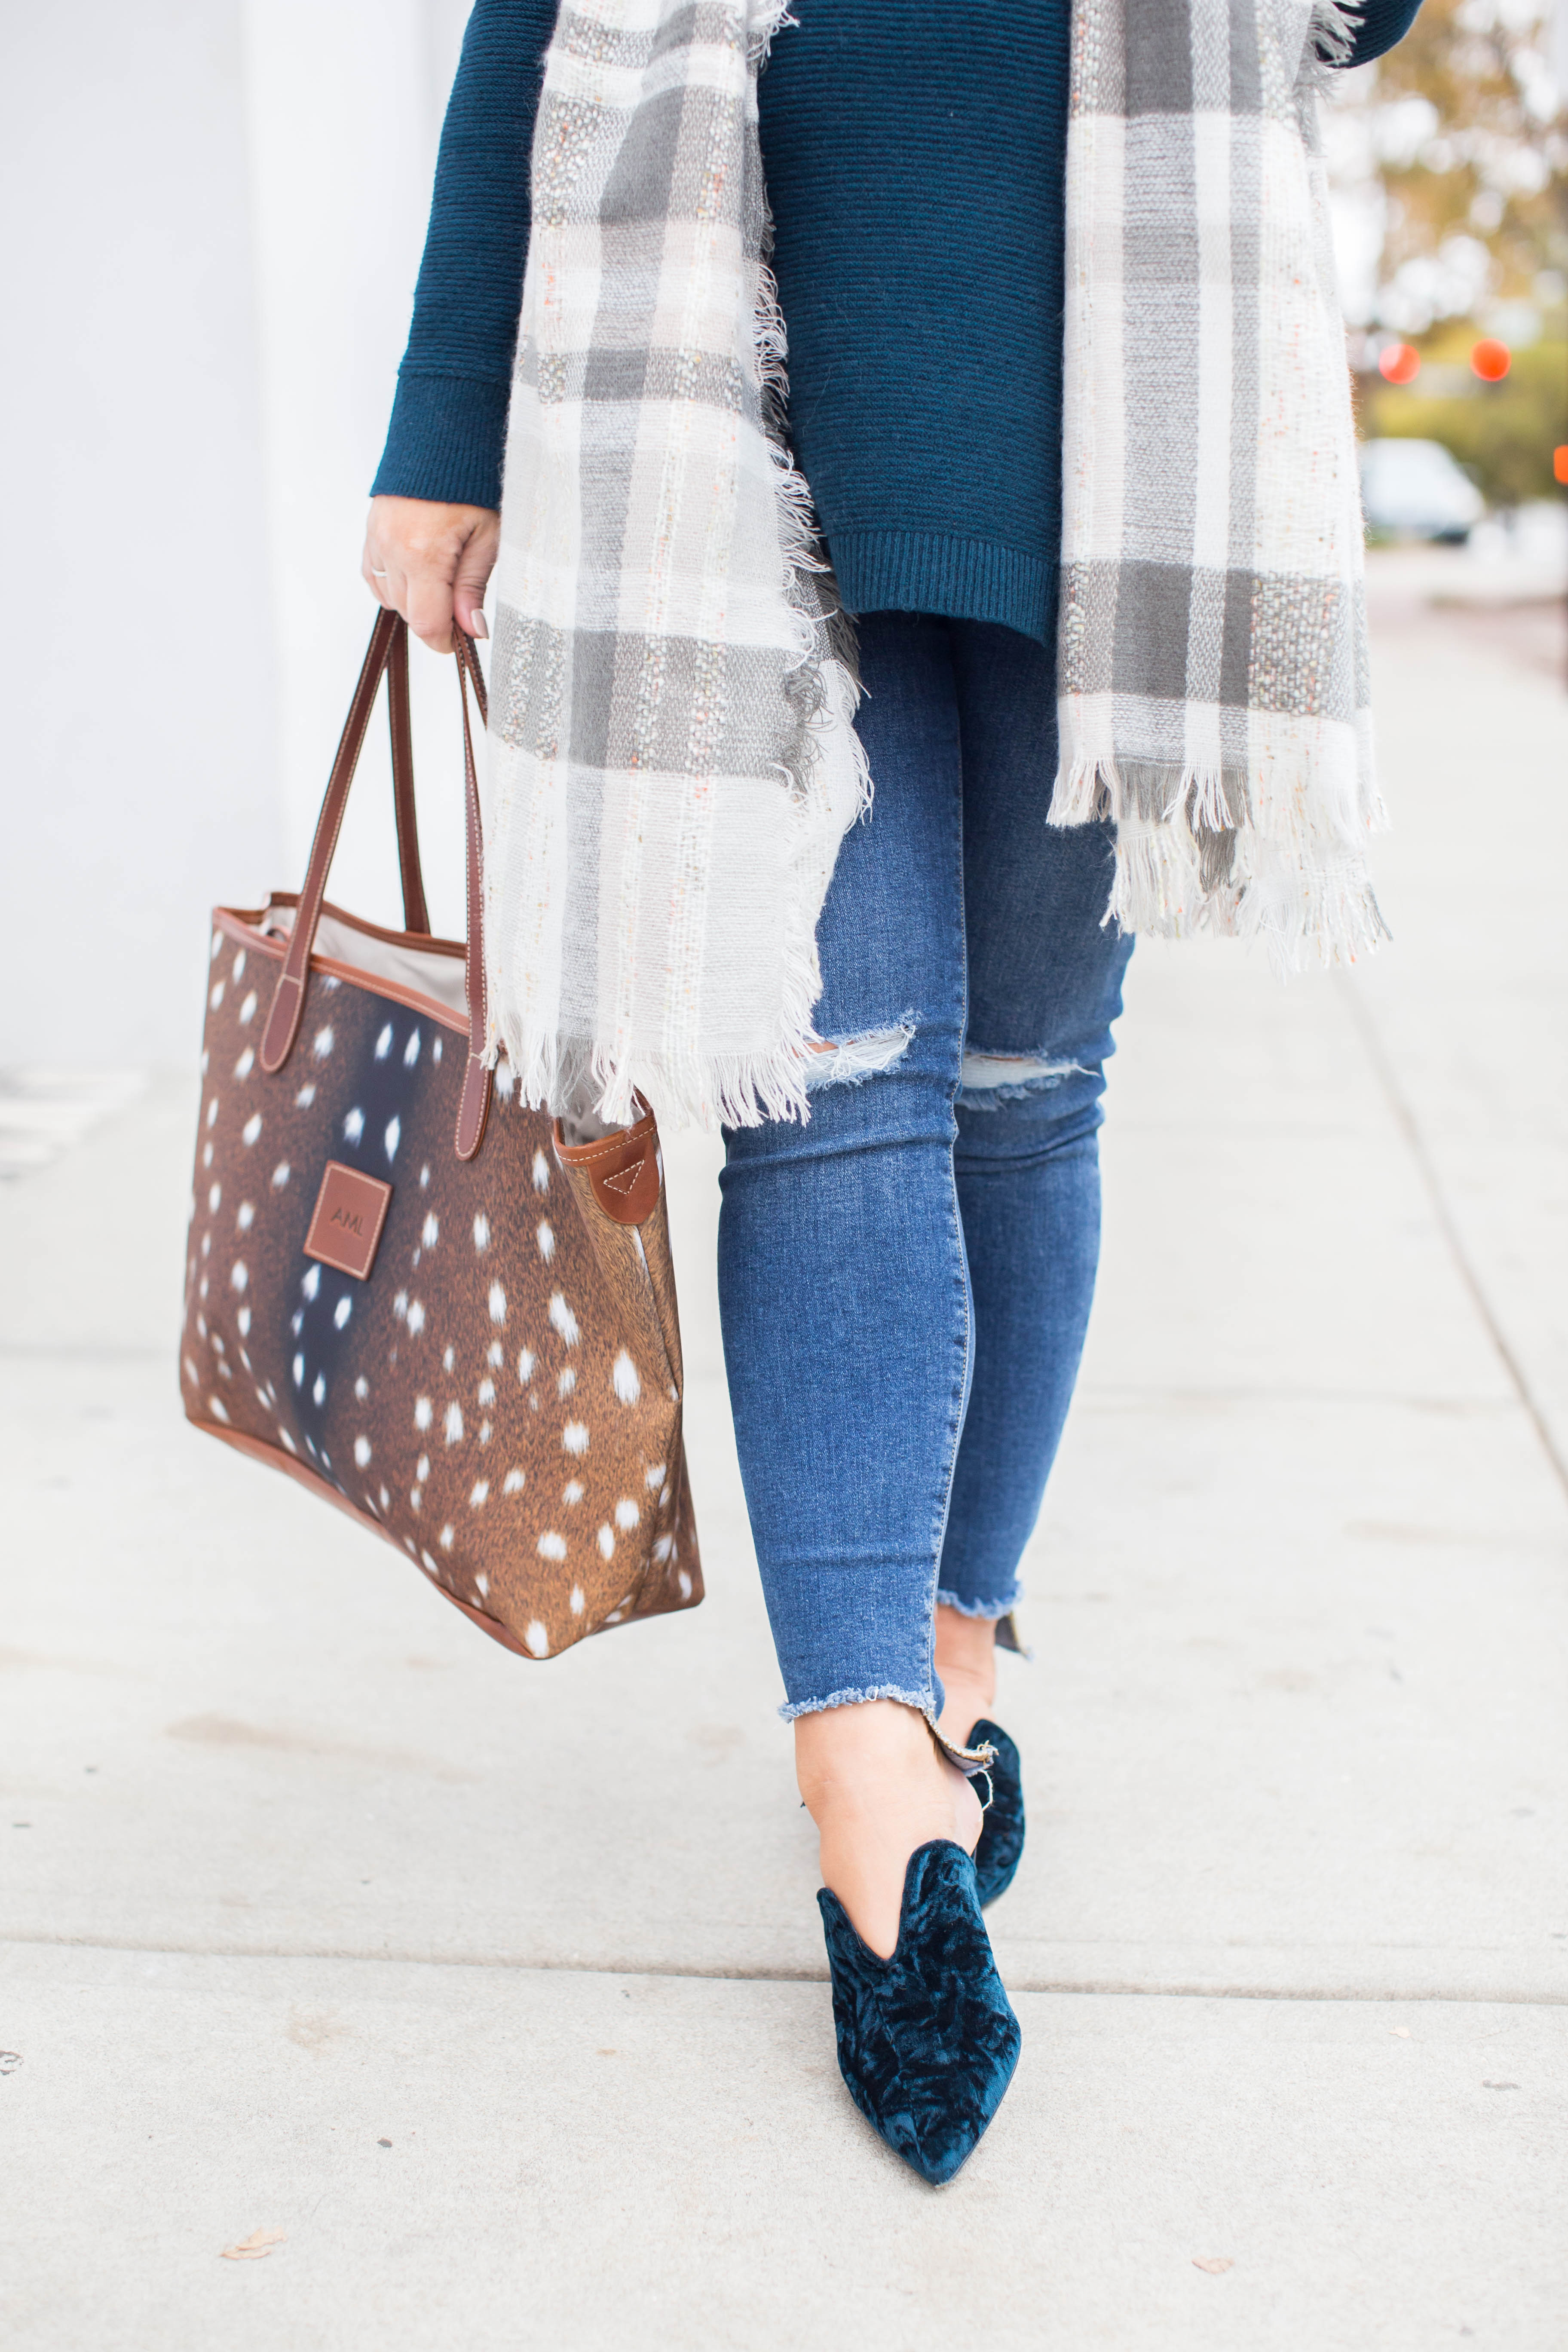 Velvet Mules by North Carolina fashion blogger Coffee Beans and Bobby Pins